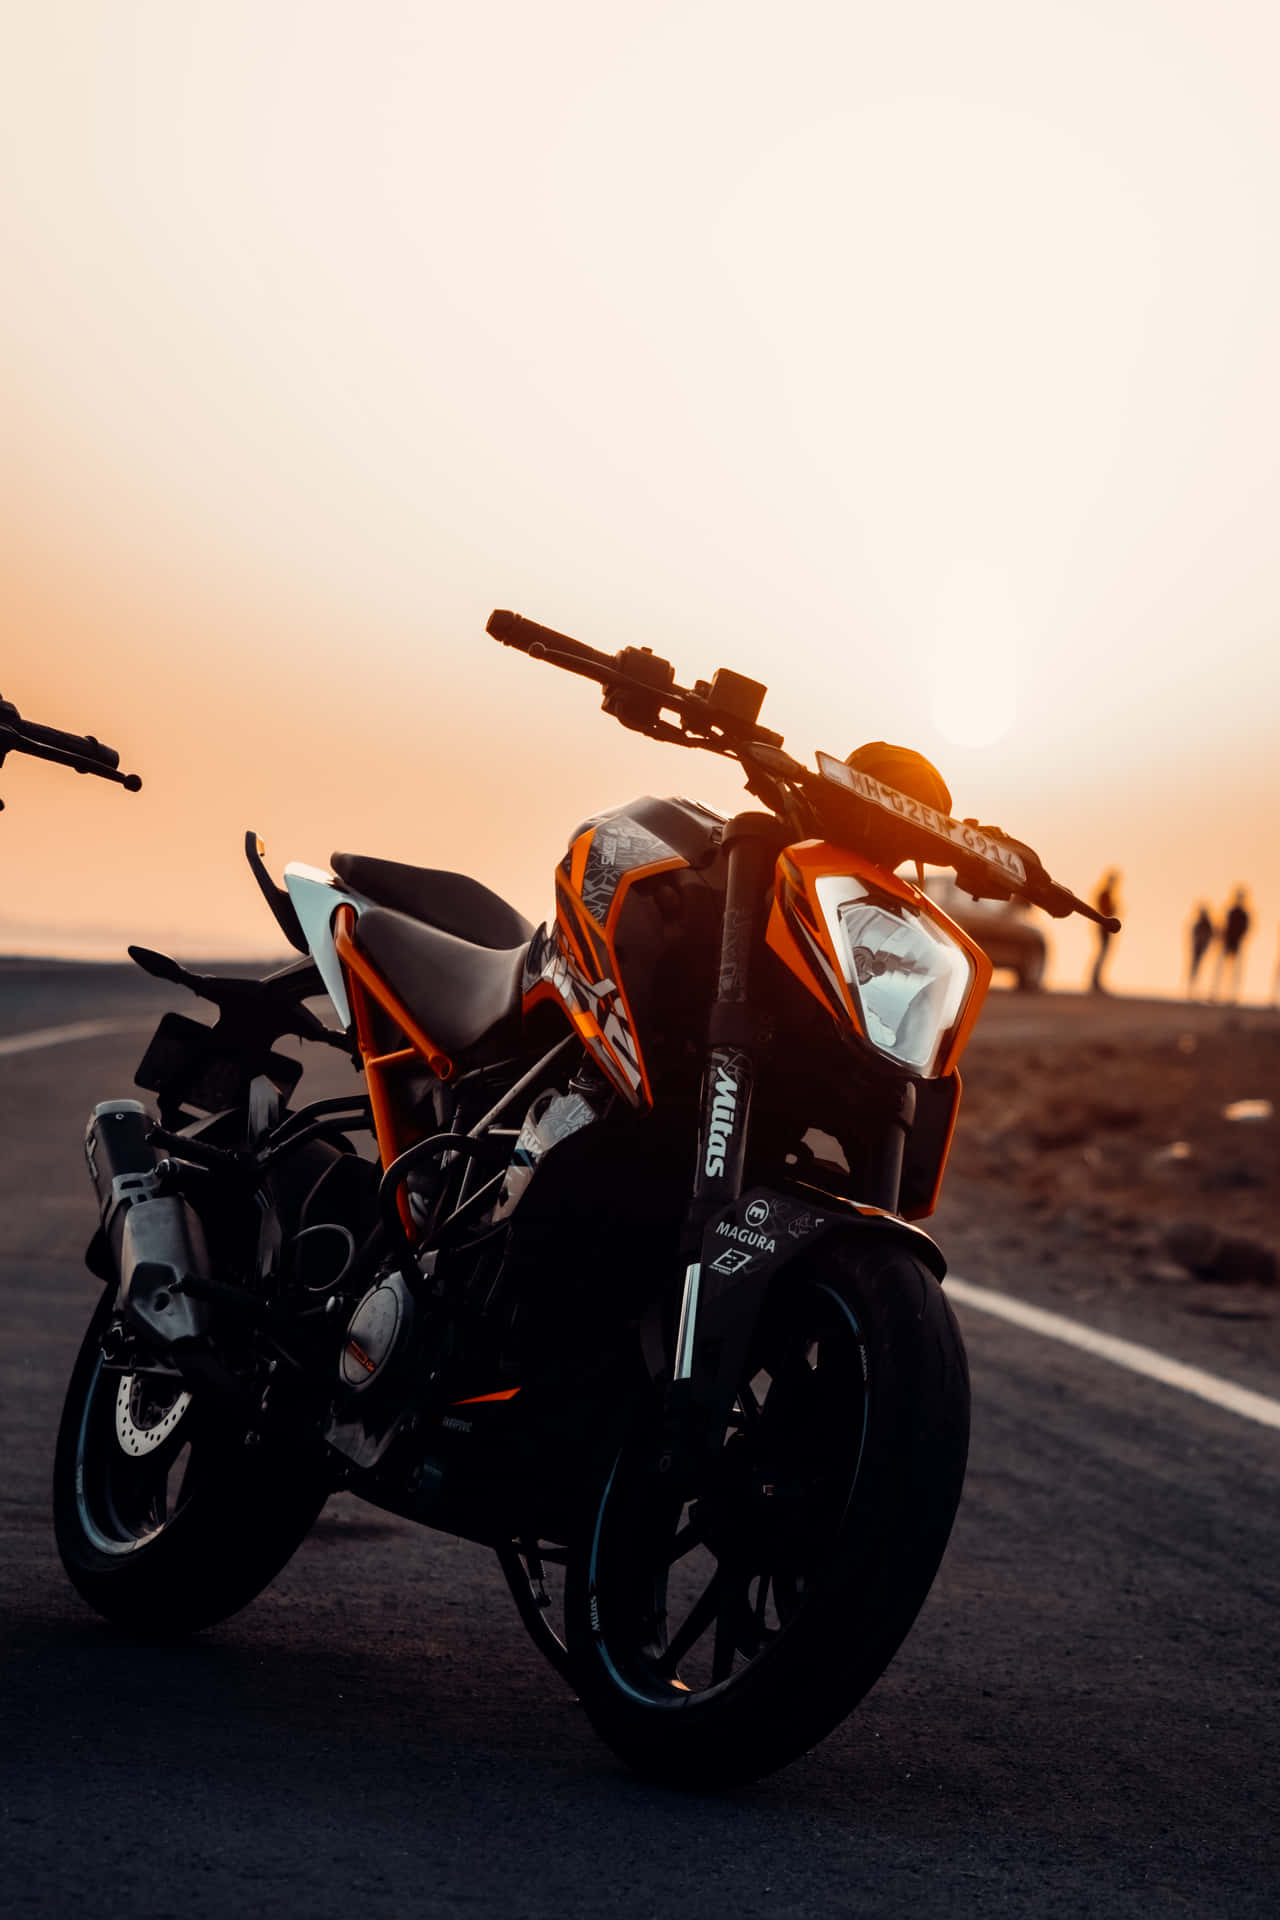 Fasten your helmet, hit the open road, and fly on your HD motorcycle! Wallpaper